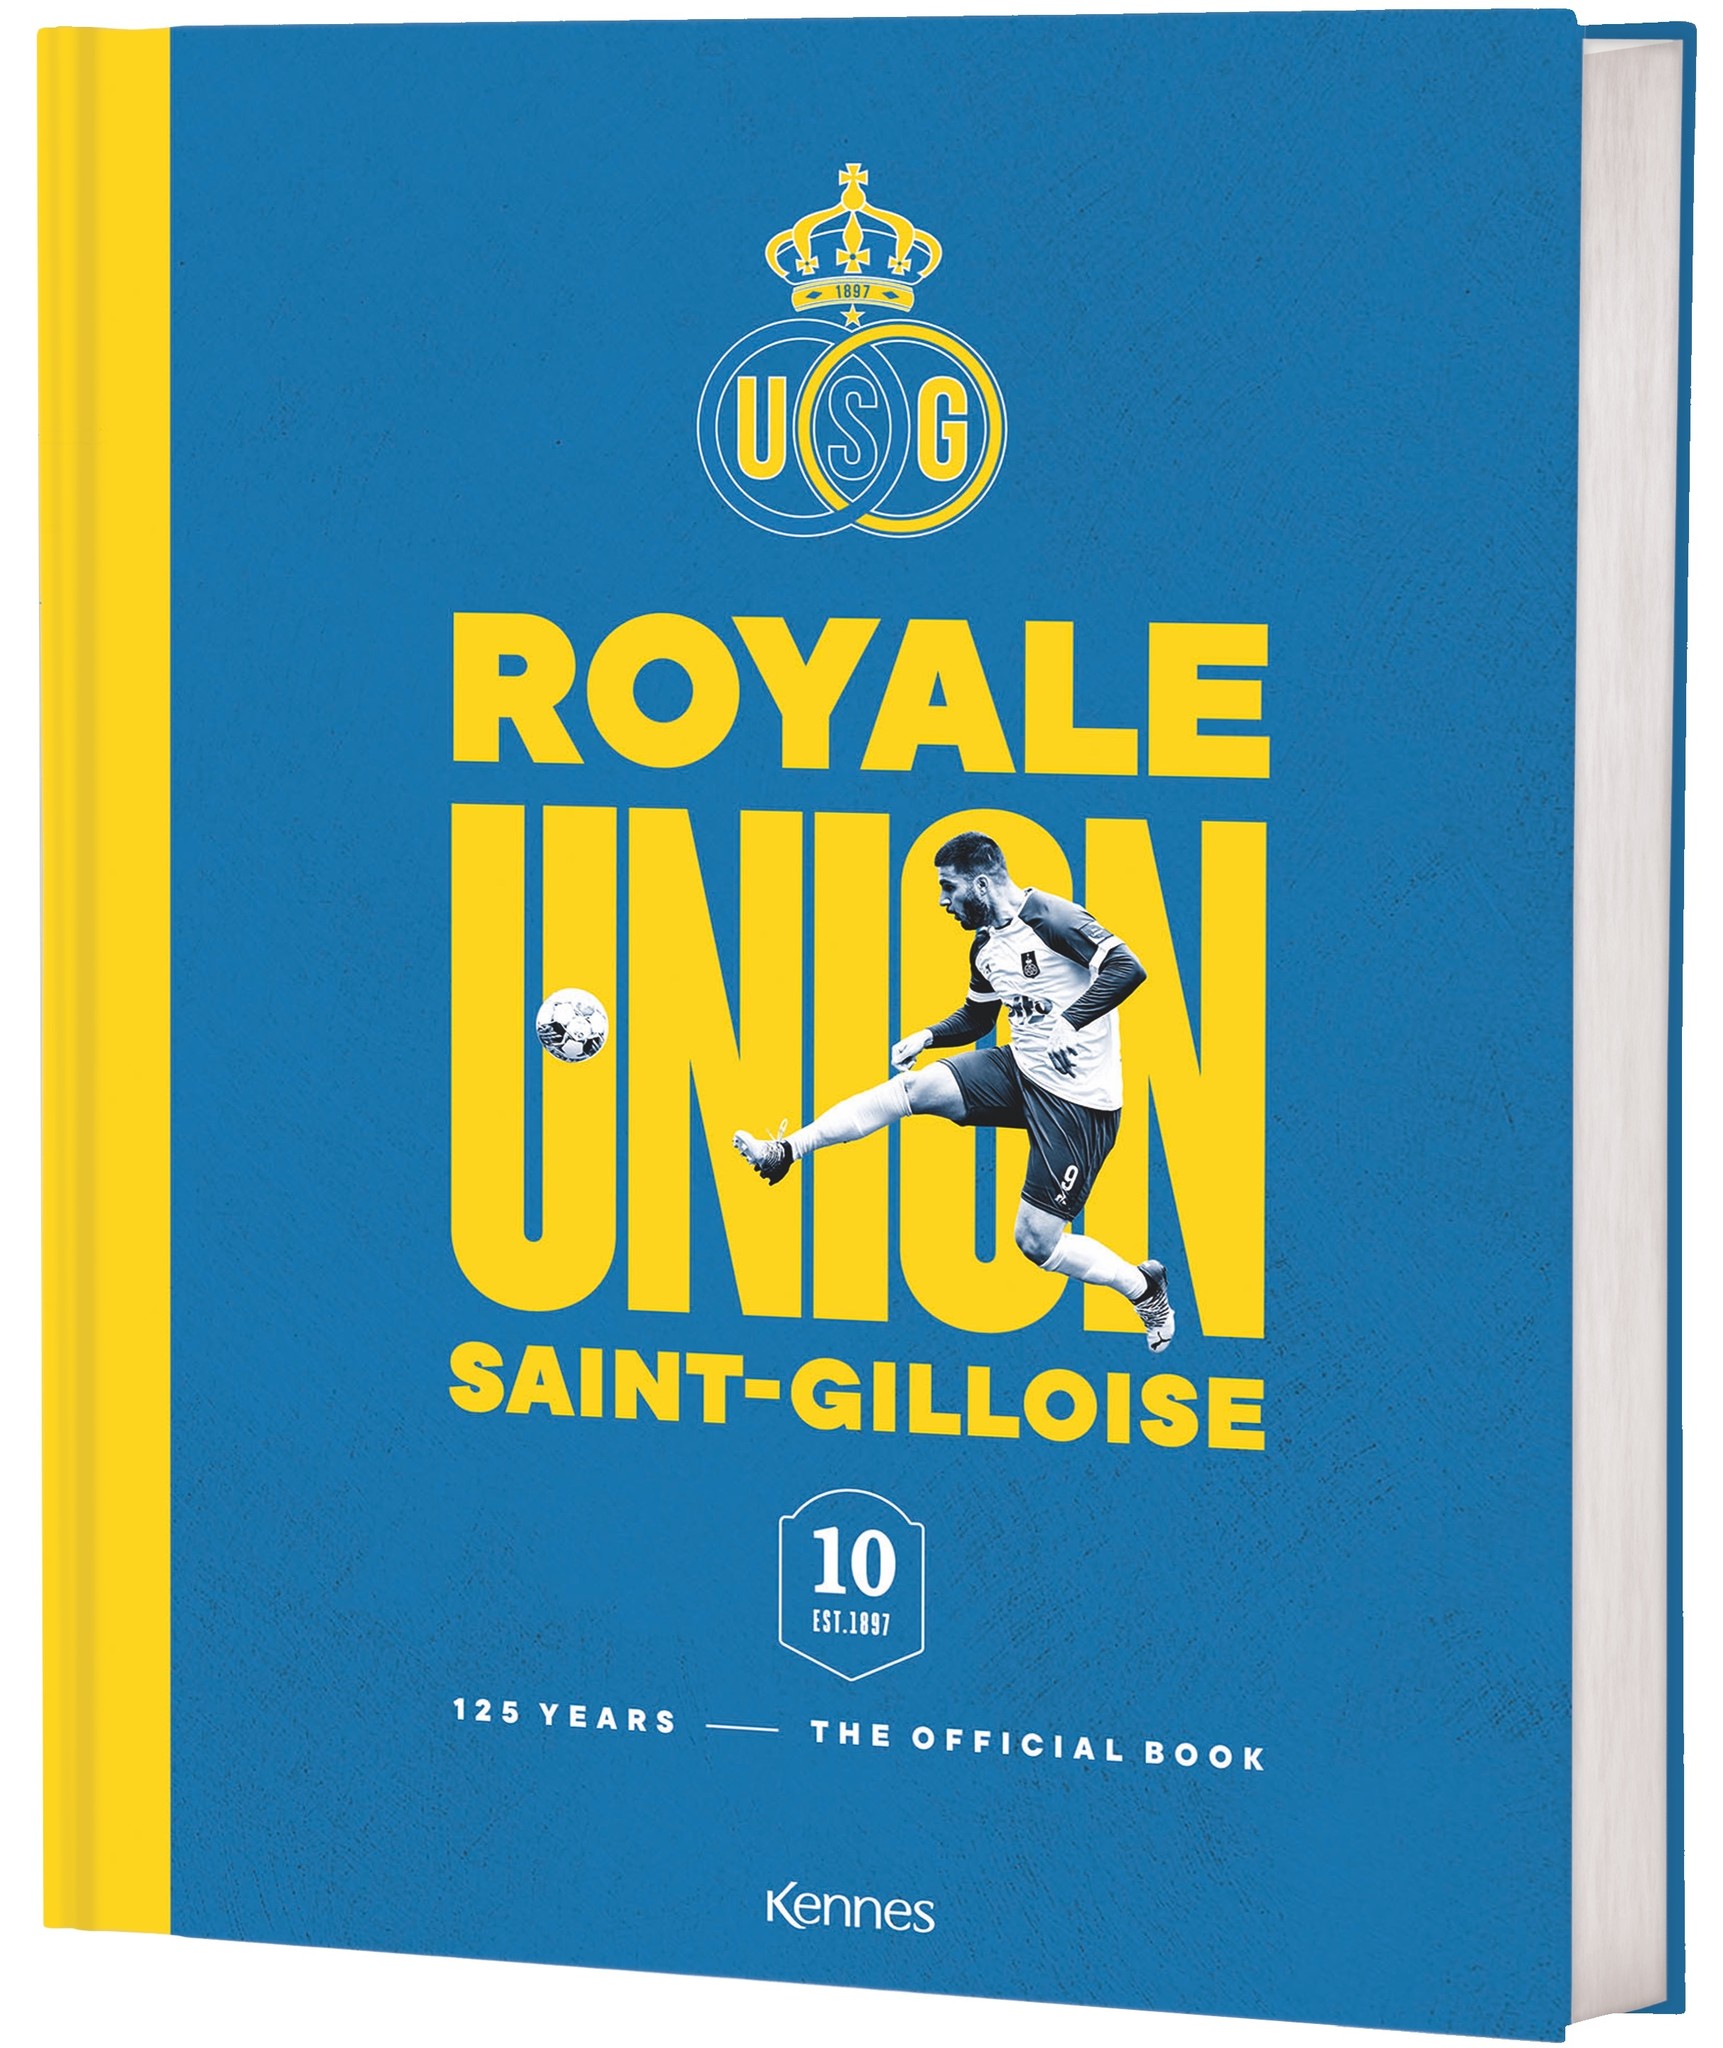 The official book 125 years Royale Union Saint-Gilloise